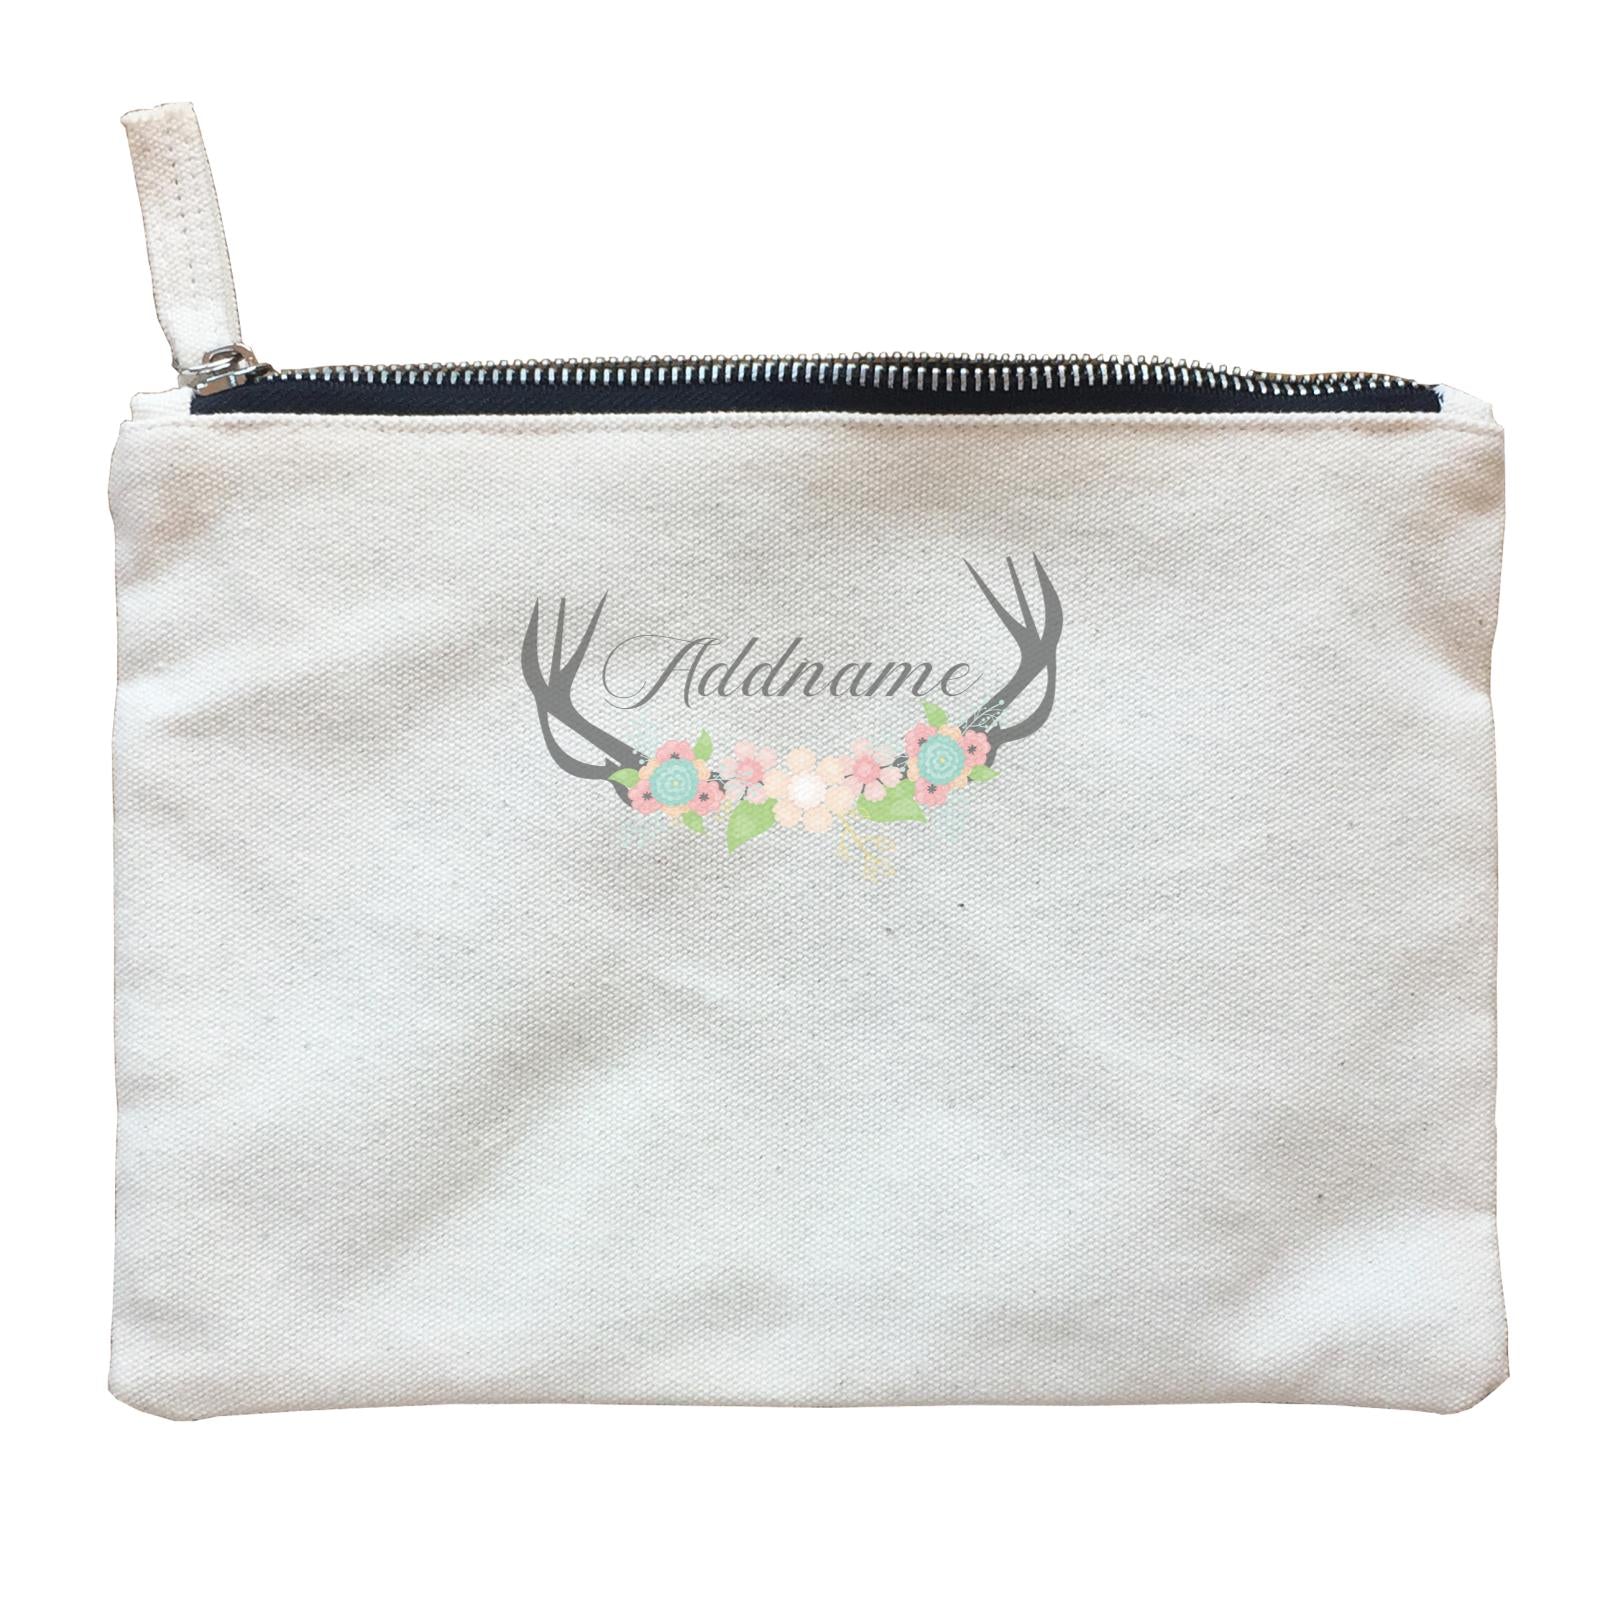 Basic Family Series Pastel Deer Black Deer Antlers With Flower Addname Zipper Pouch